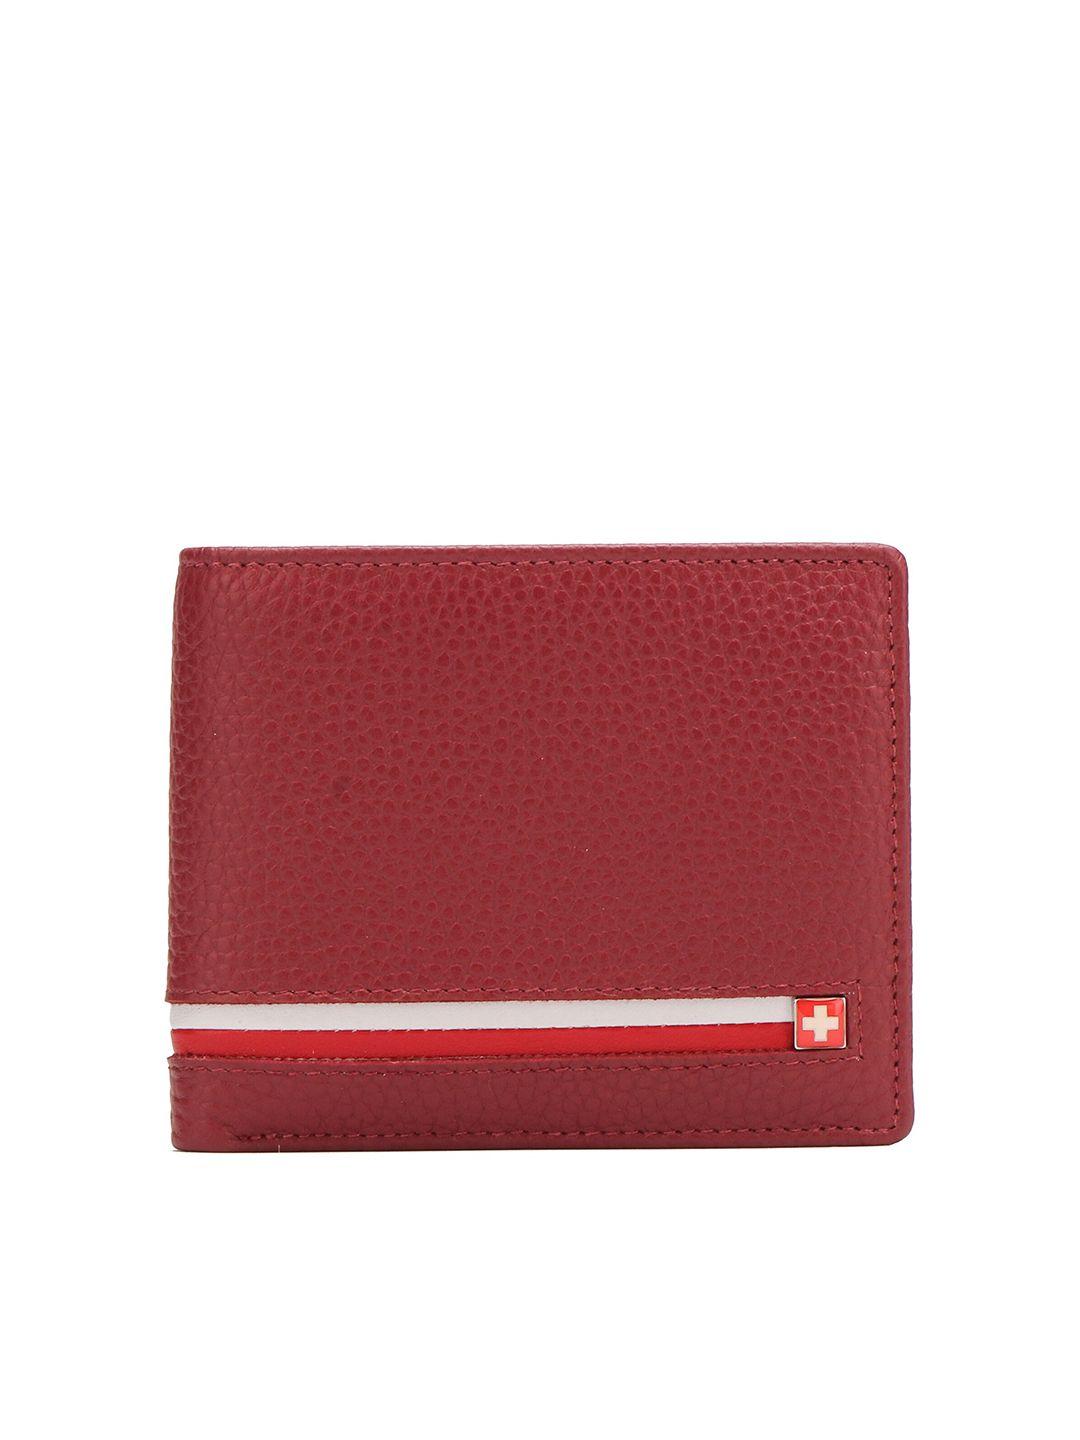 swiss military unisex red & white leather two fold wallet